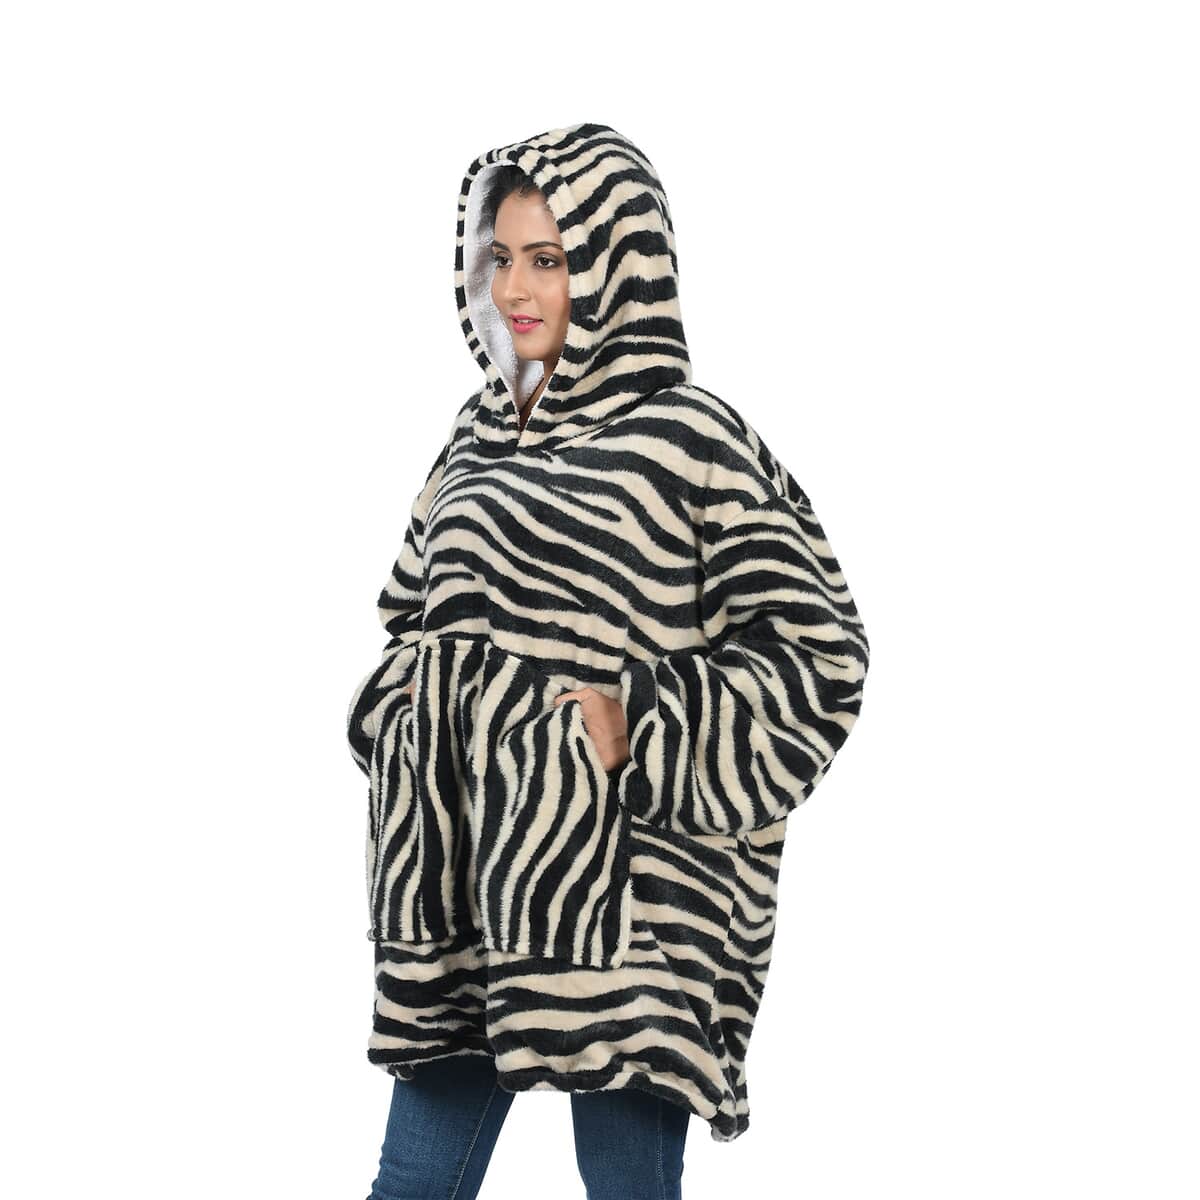 Black and White Zebra Print Sherpa Wearable Blanket with Hood (One Size Fits Most, 100% Polyester) image number 2